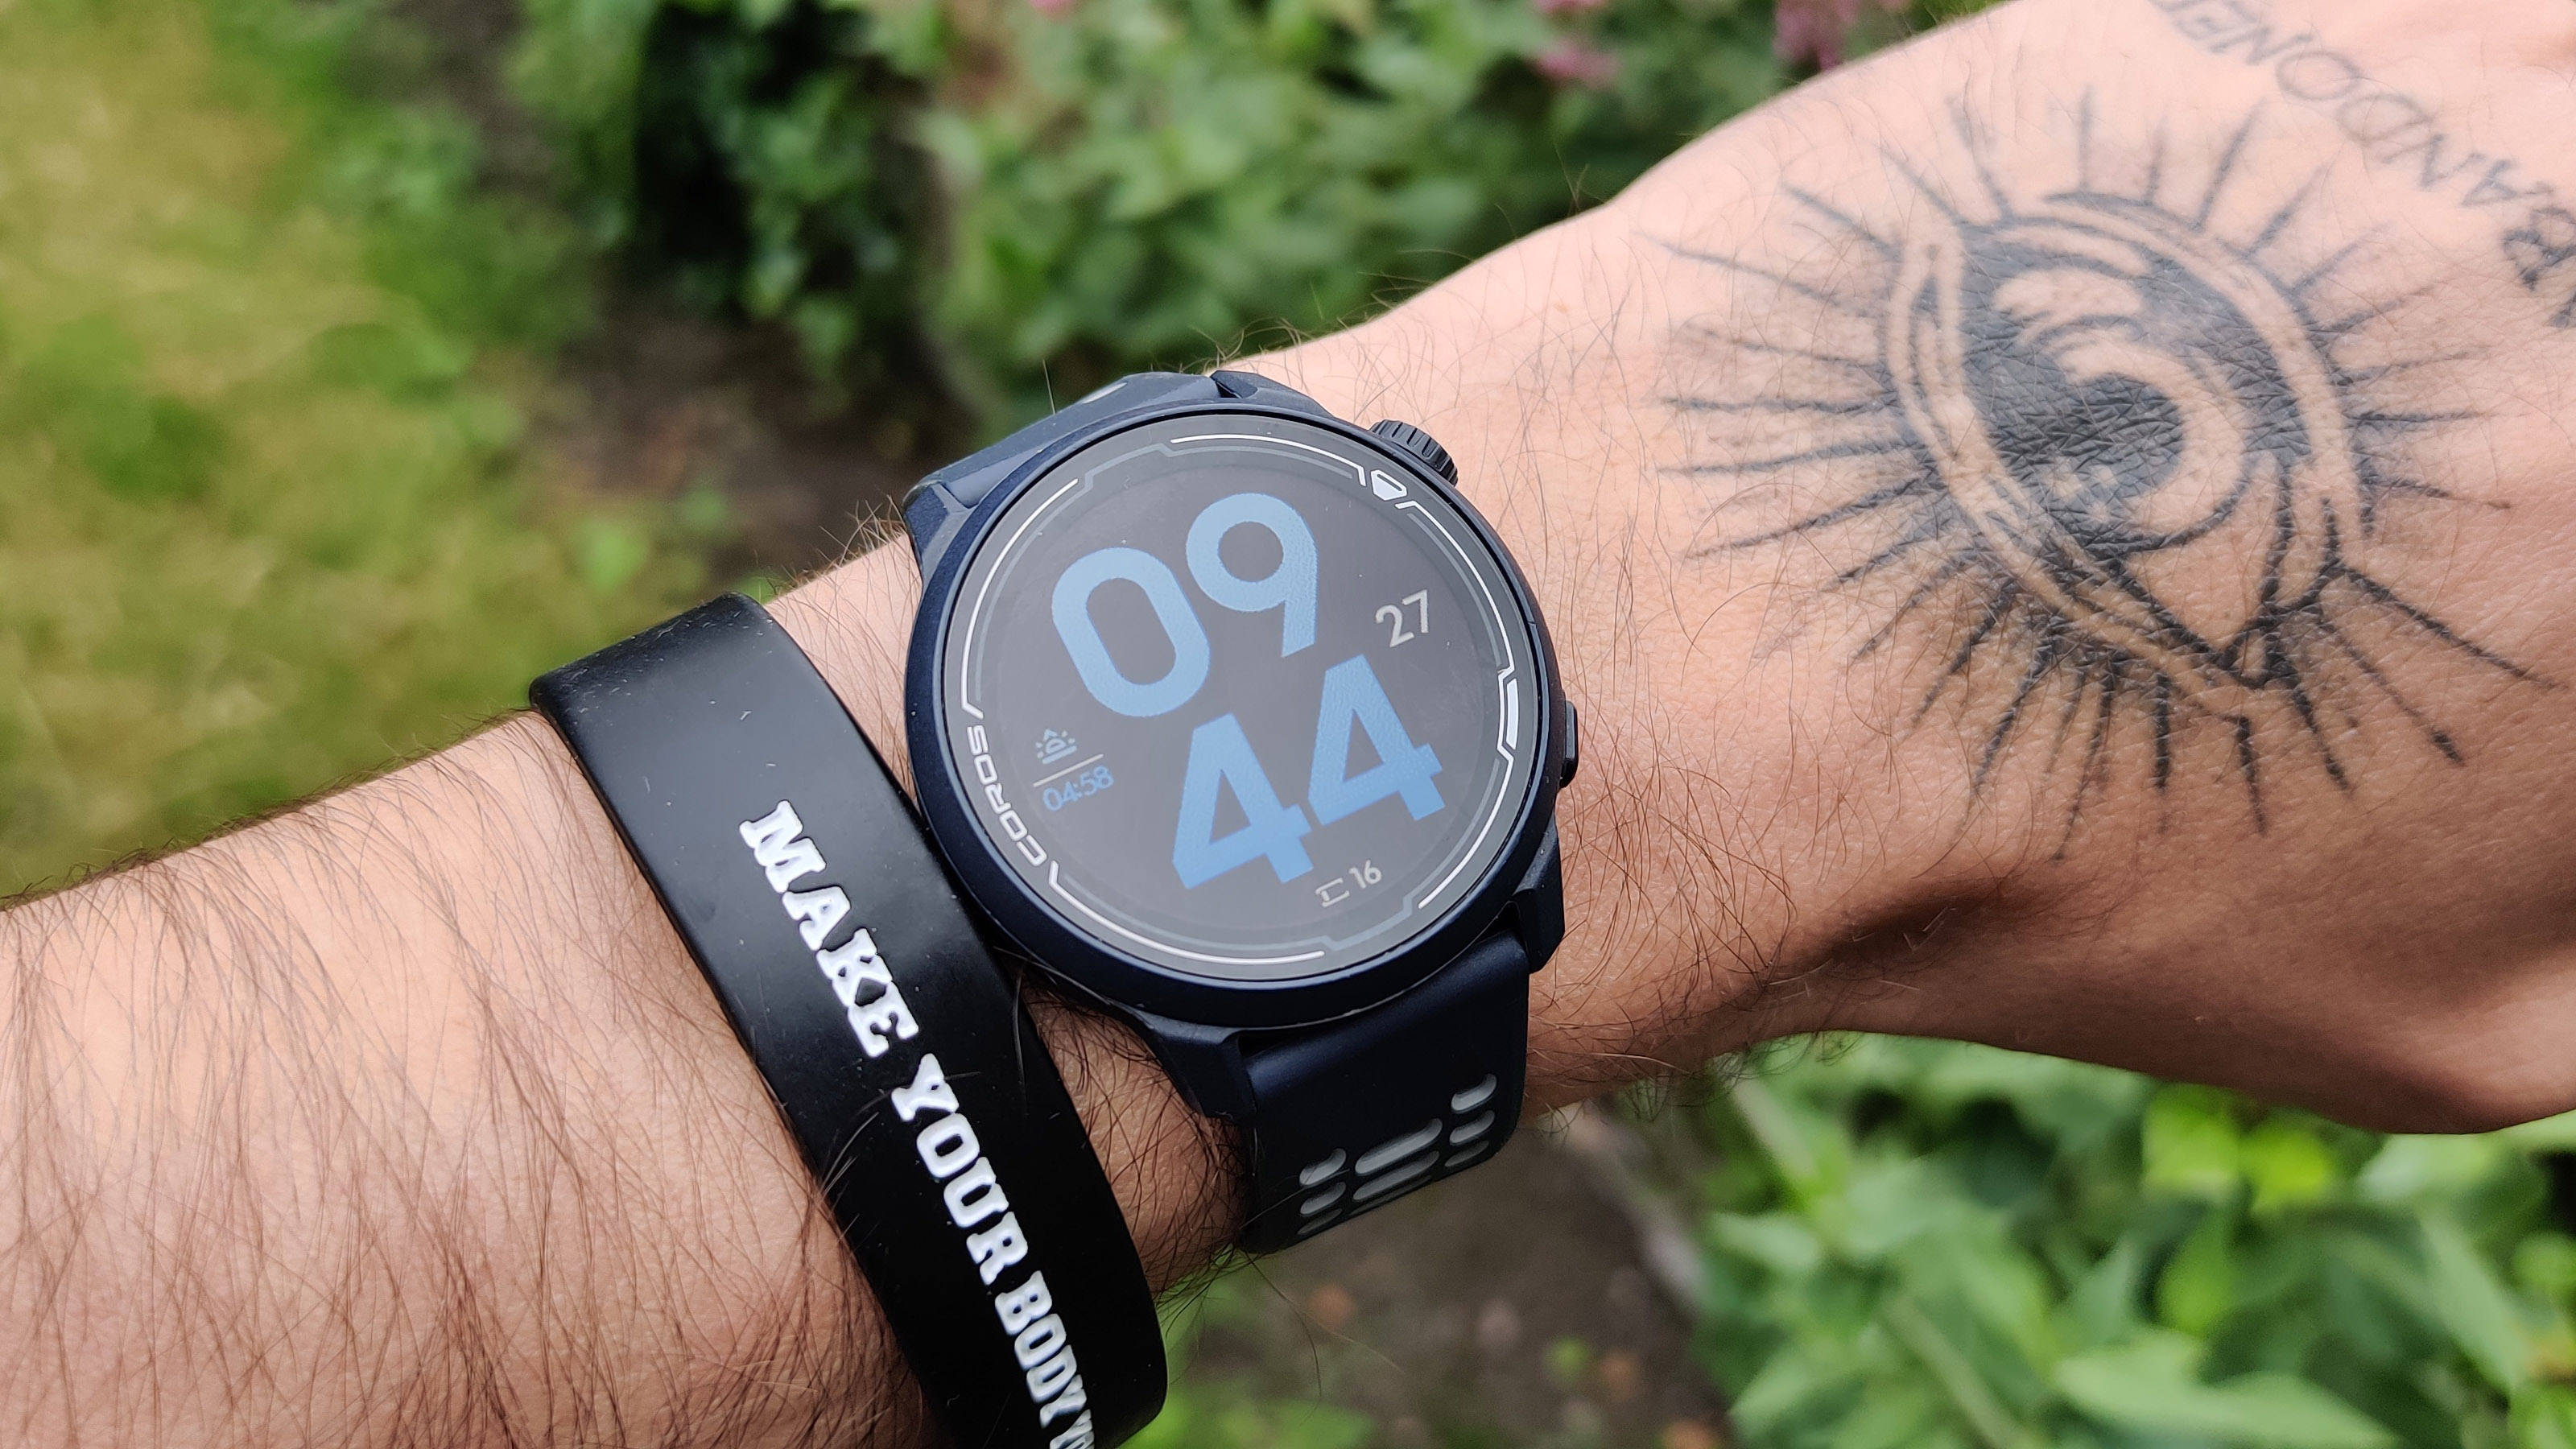 COROS Pace 2 Hands-On: A $199 Multisport watch with Running Power